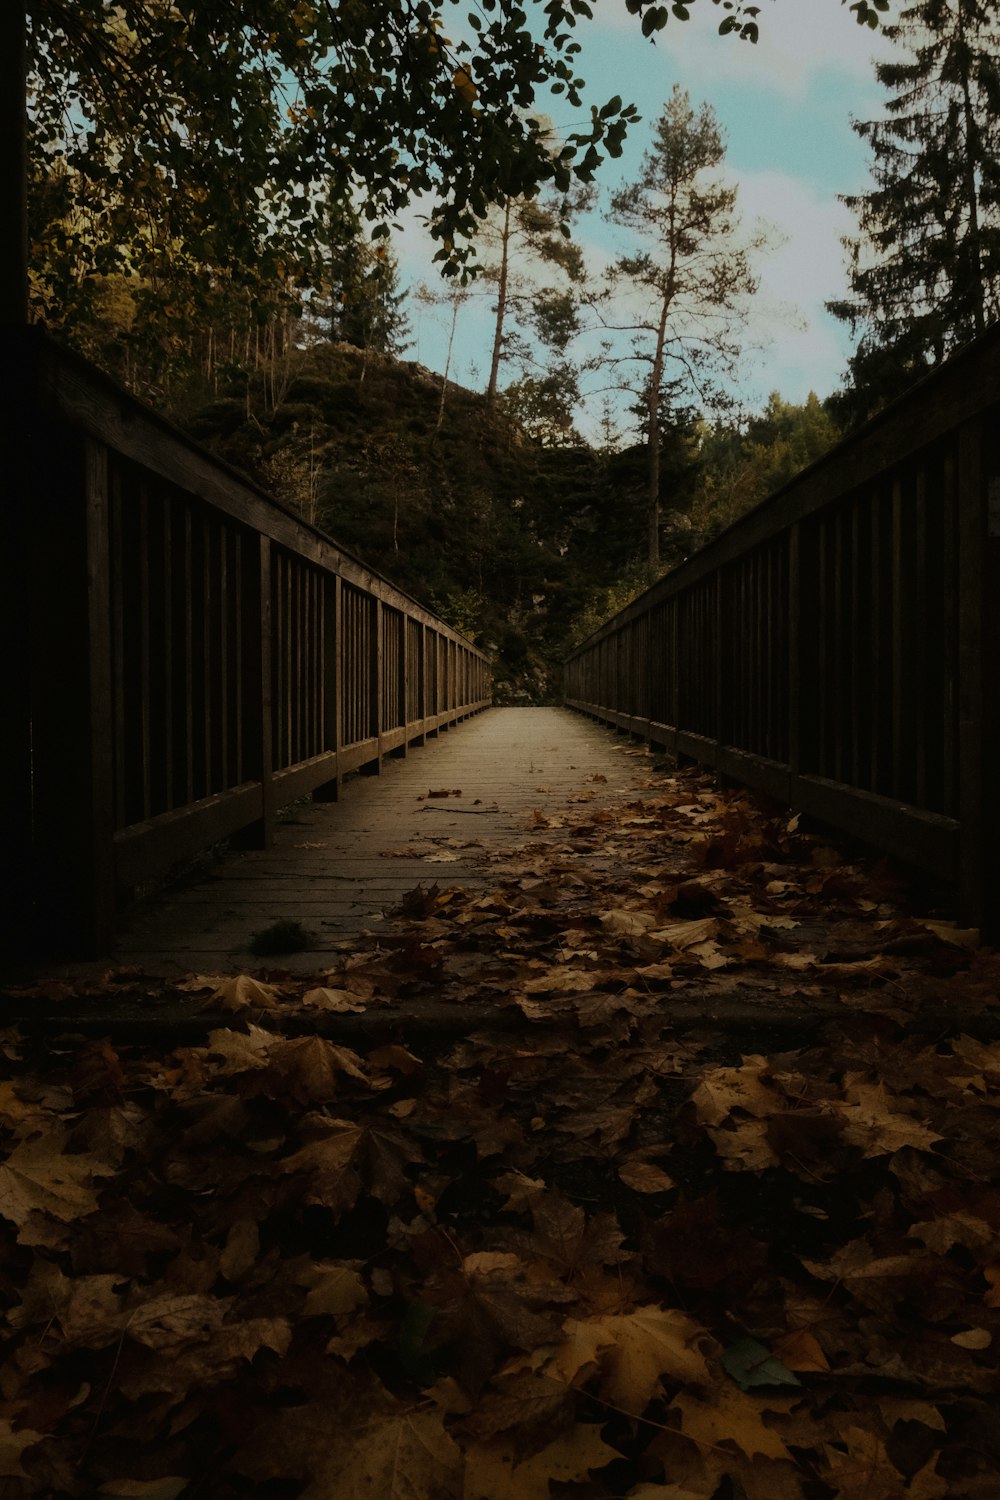 a walkway with leaves on the ground and trees in the background